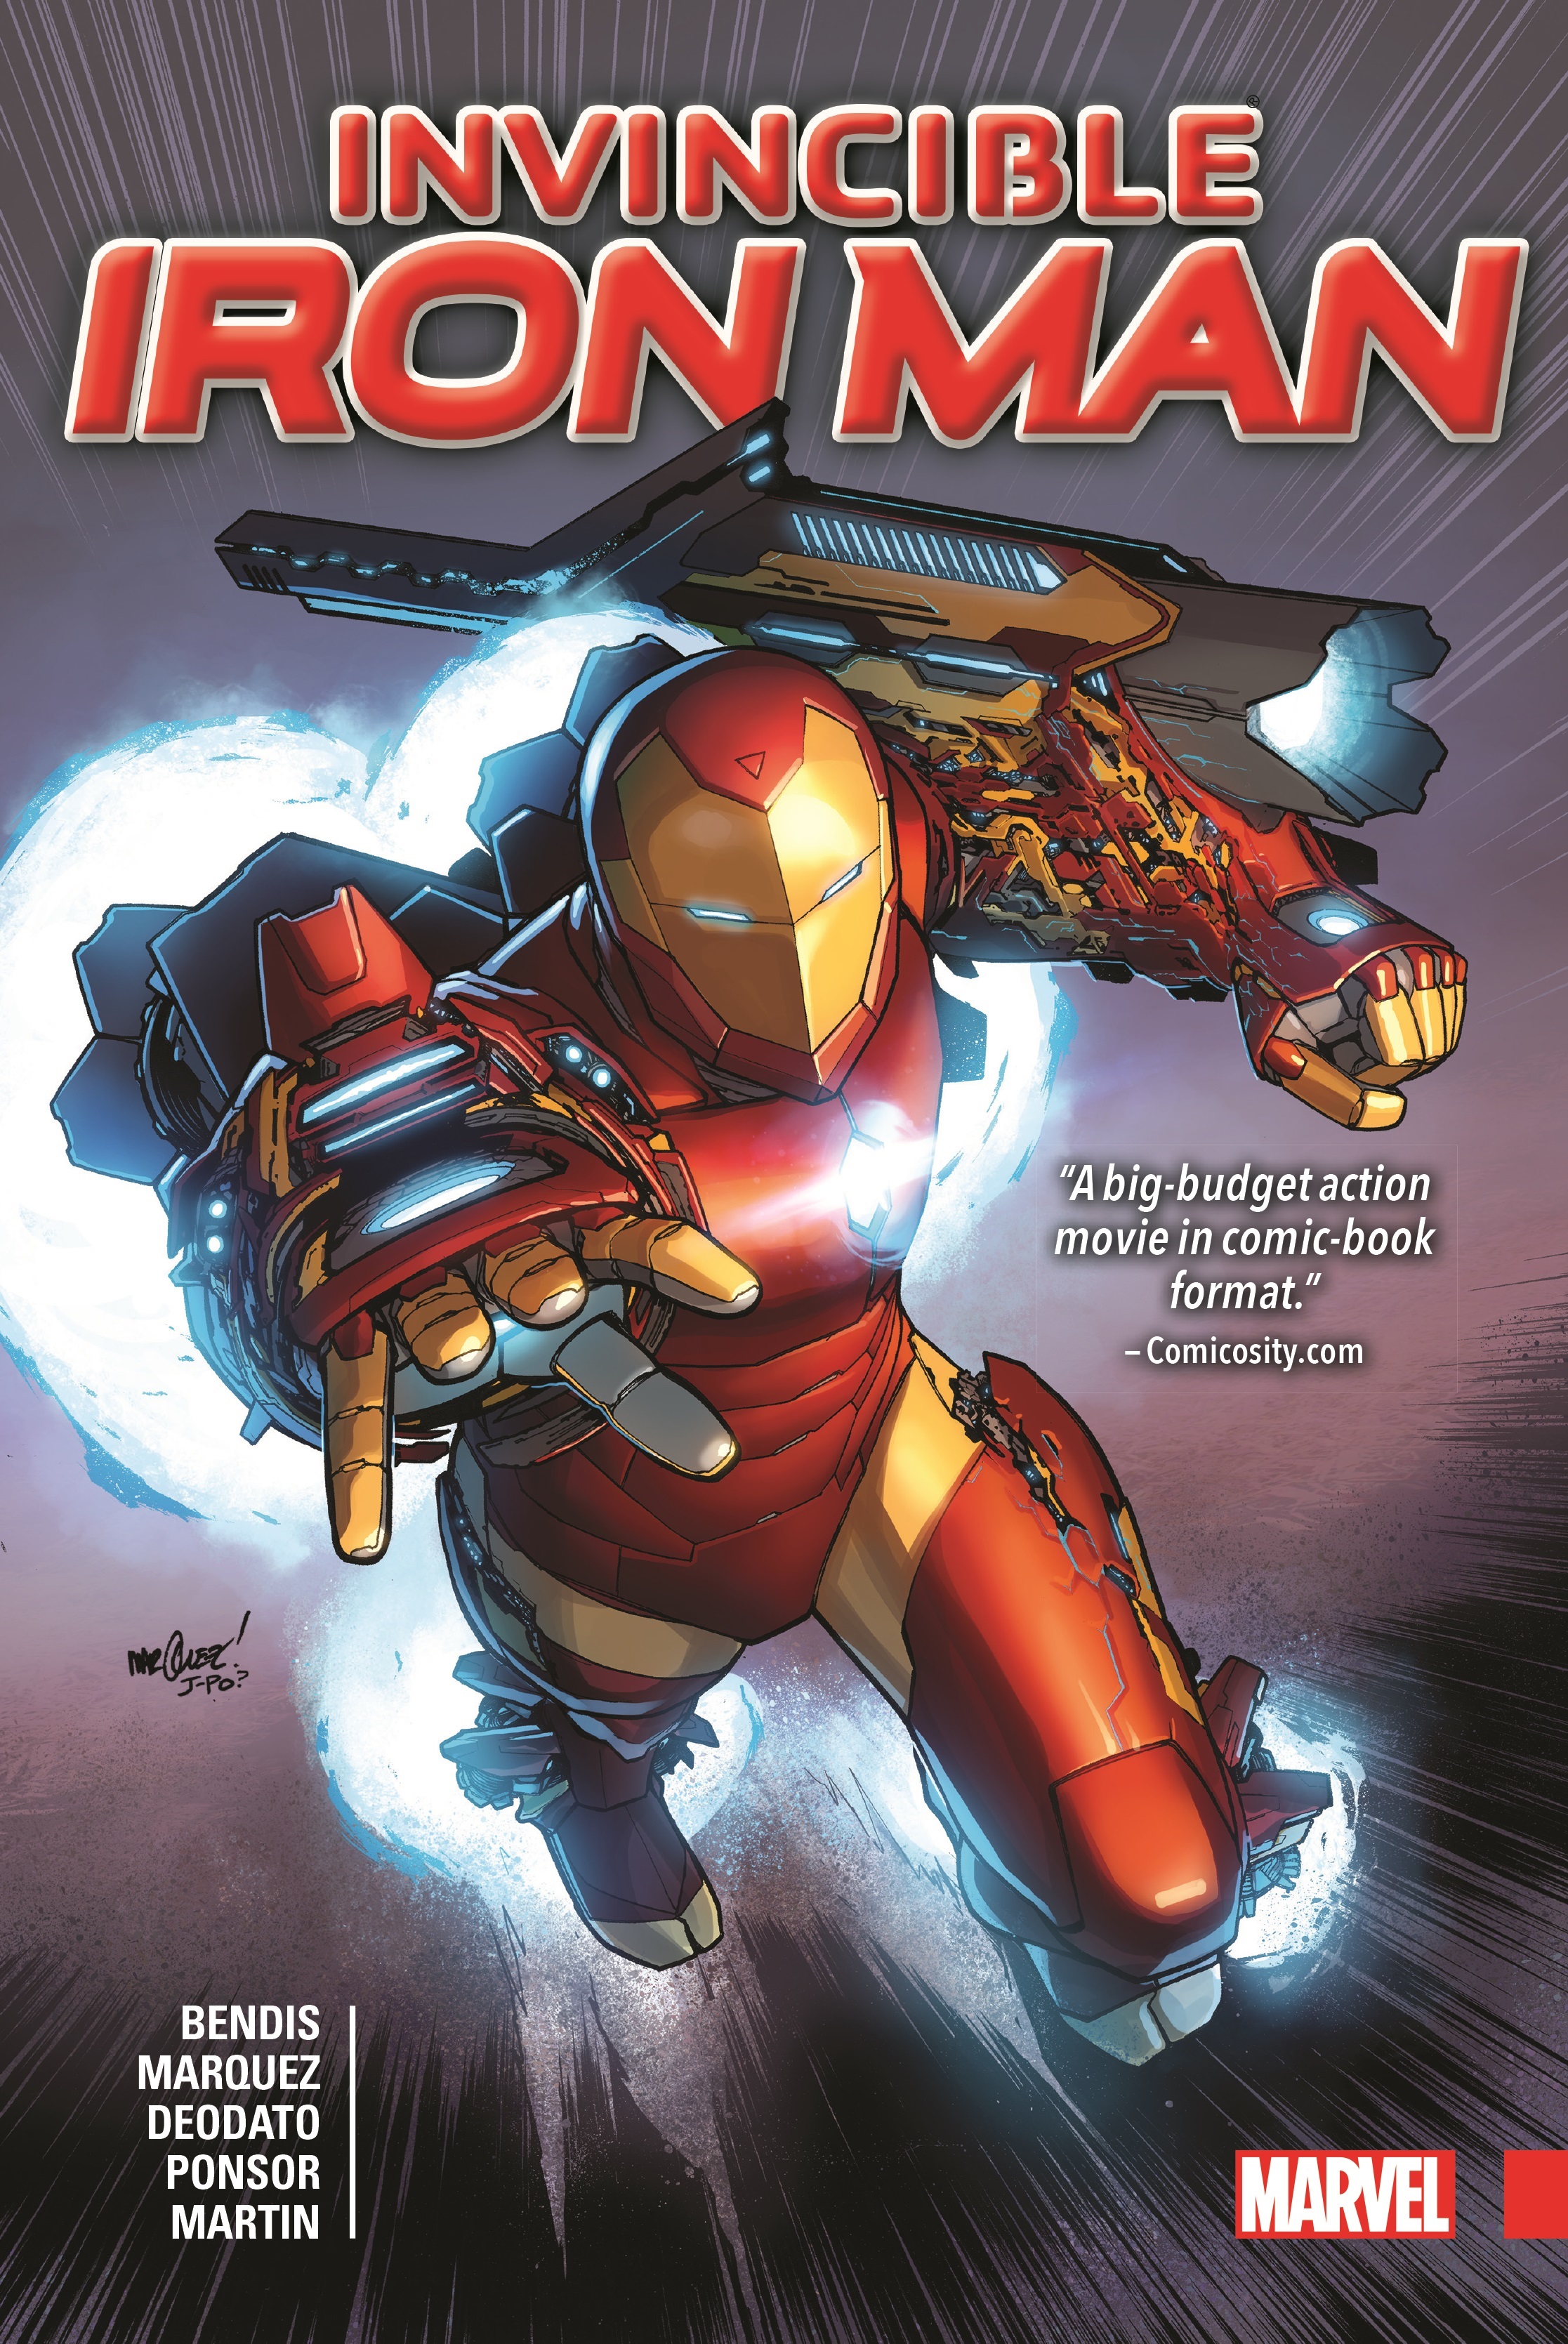 Invincible Iron Man by Brian Michael Bendis (Hardcover)